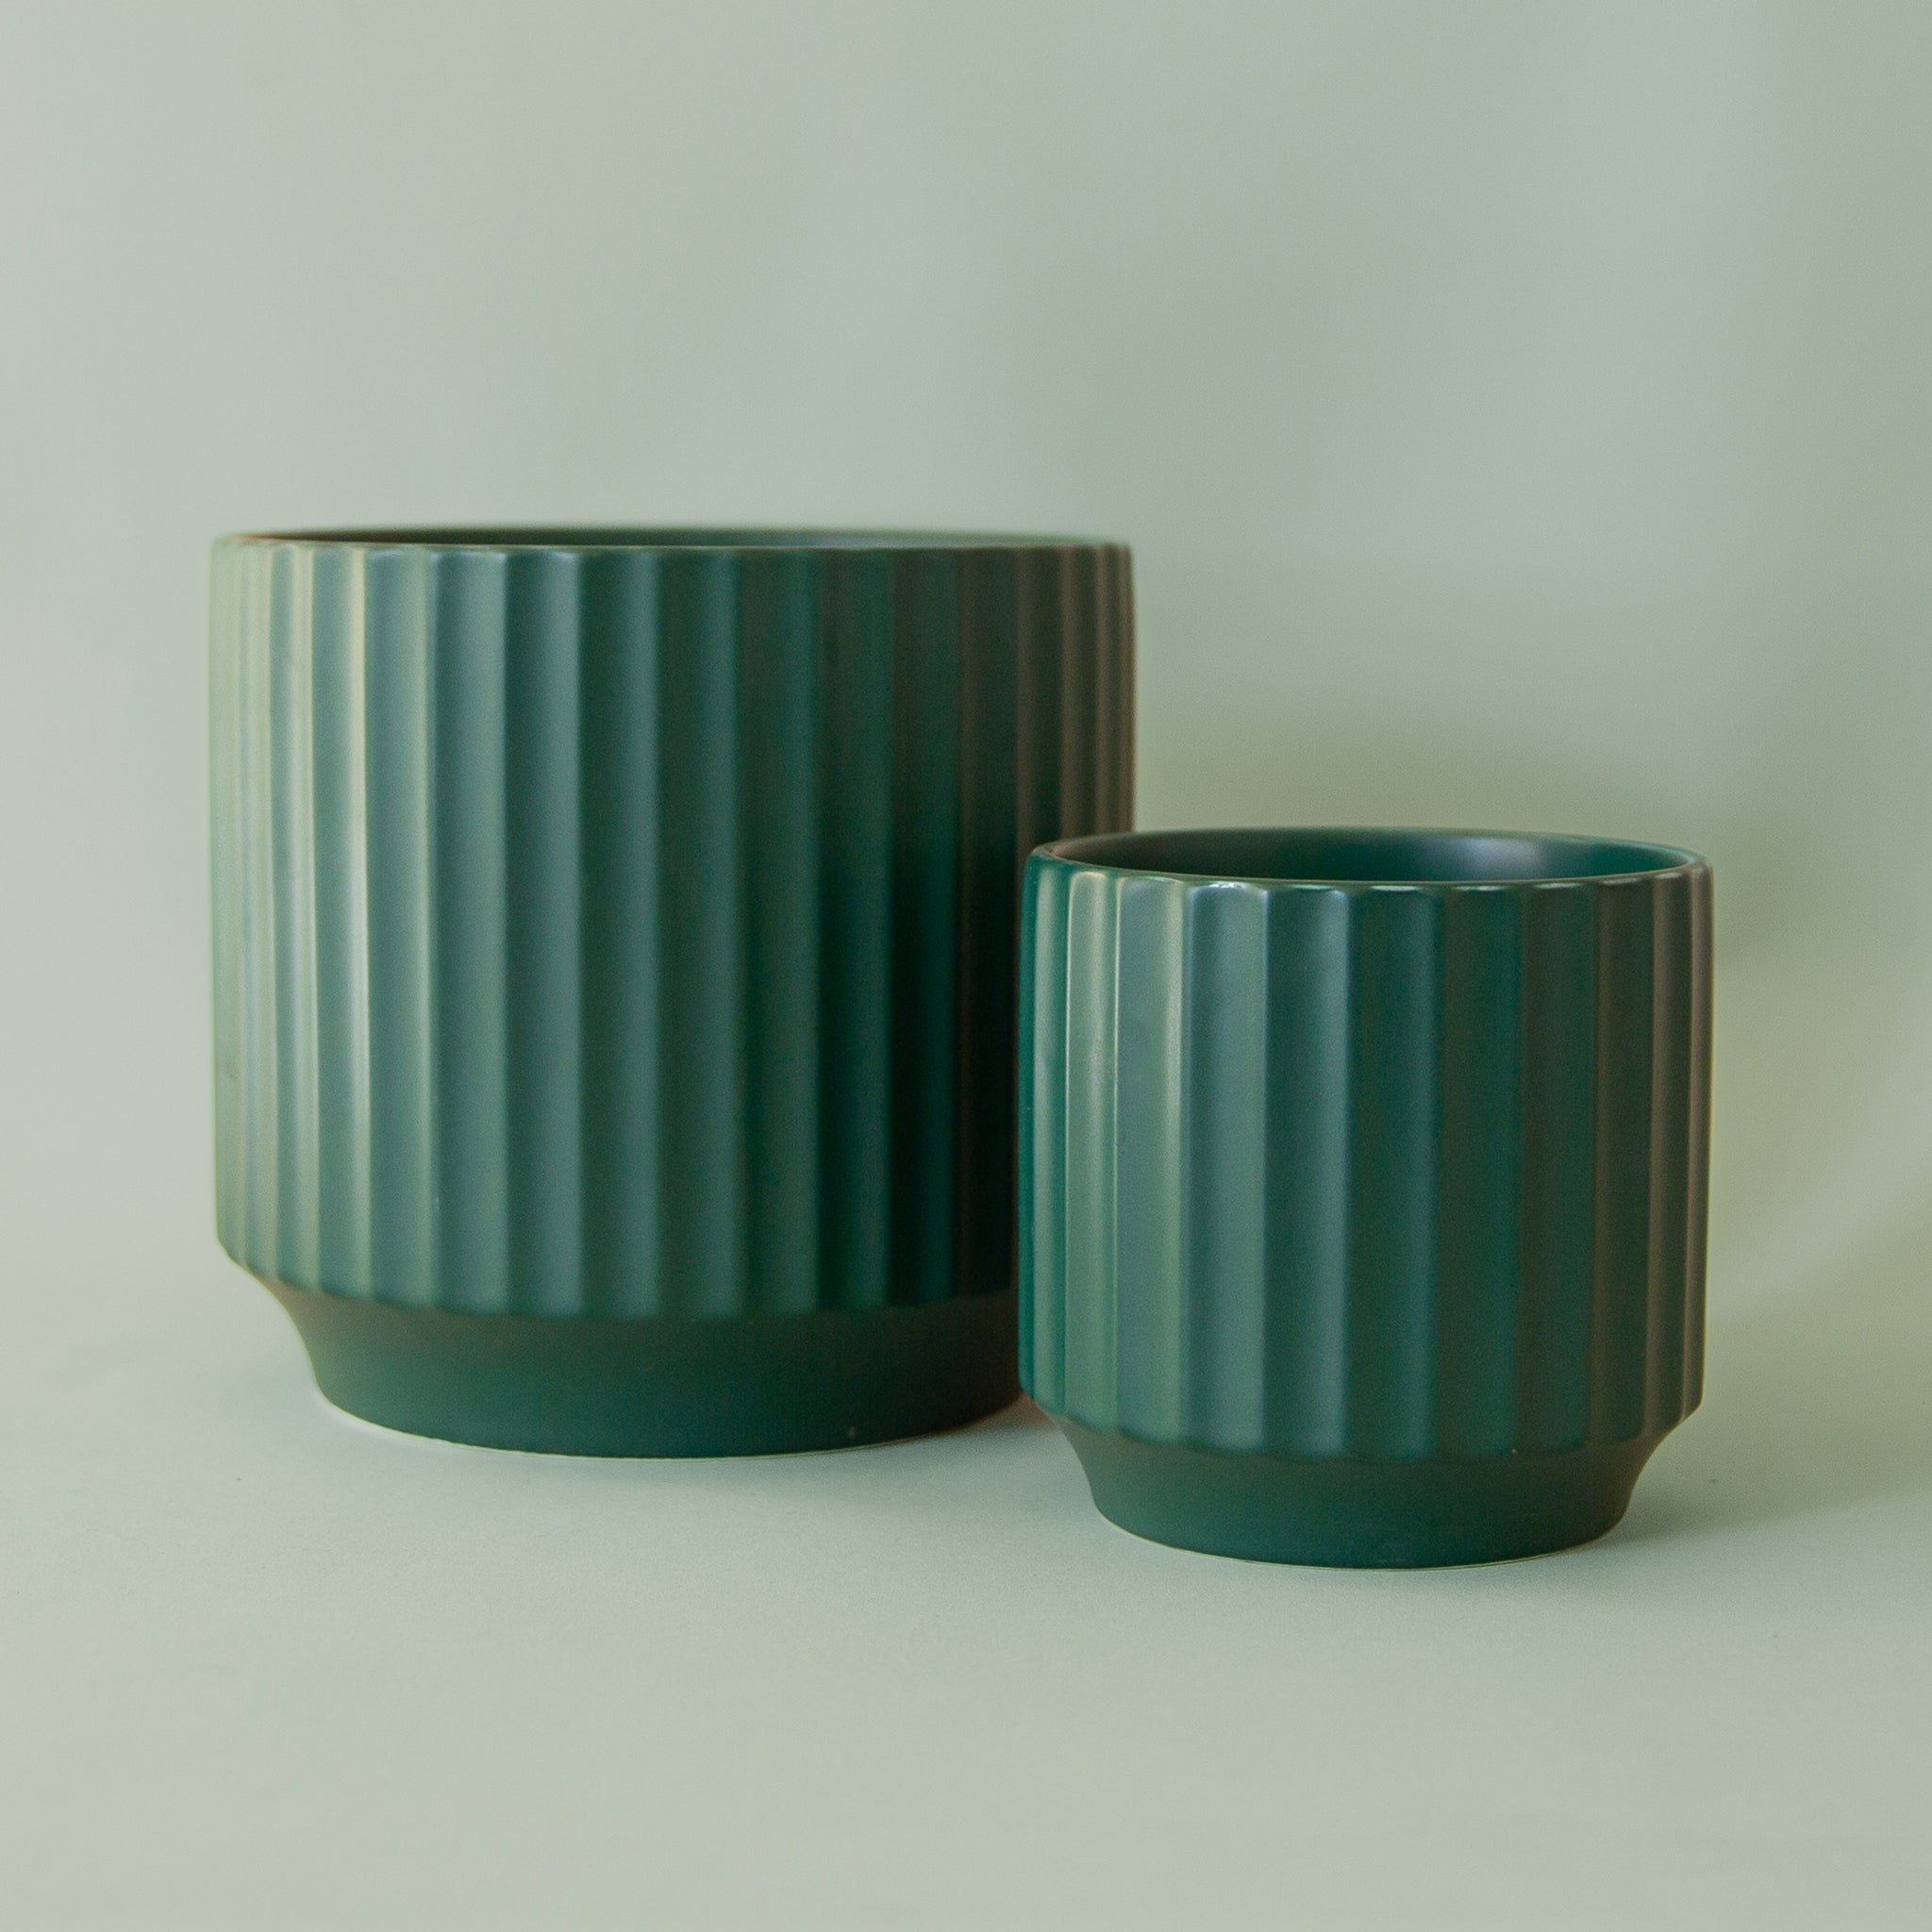 A dark green fluted ceramic planter in two different sizes. 